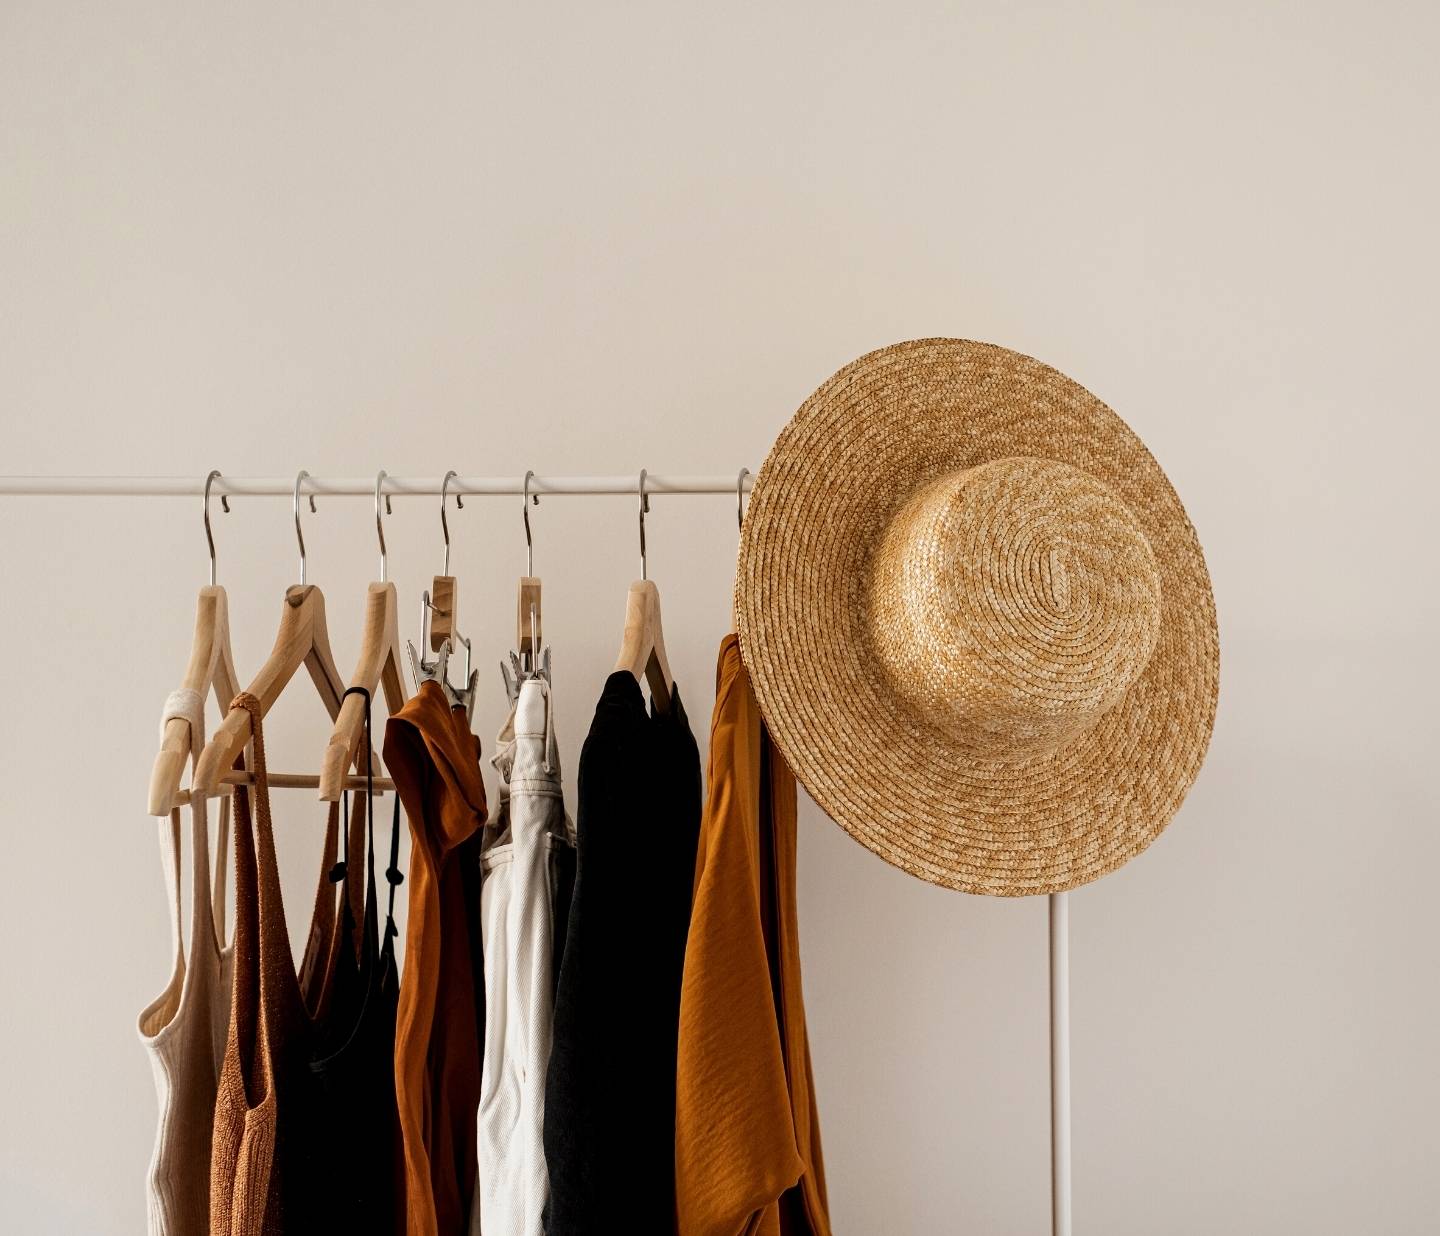 Ethical clothing on a clothes rail, with a straw hat